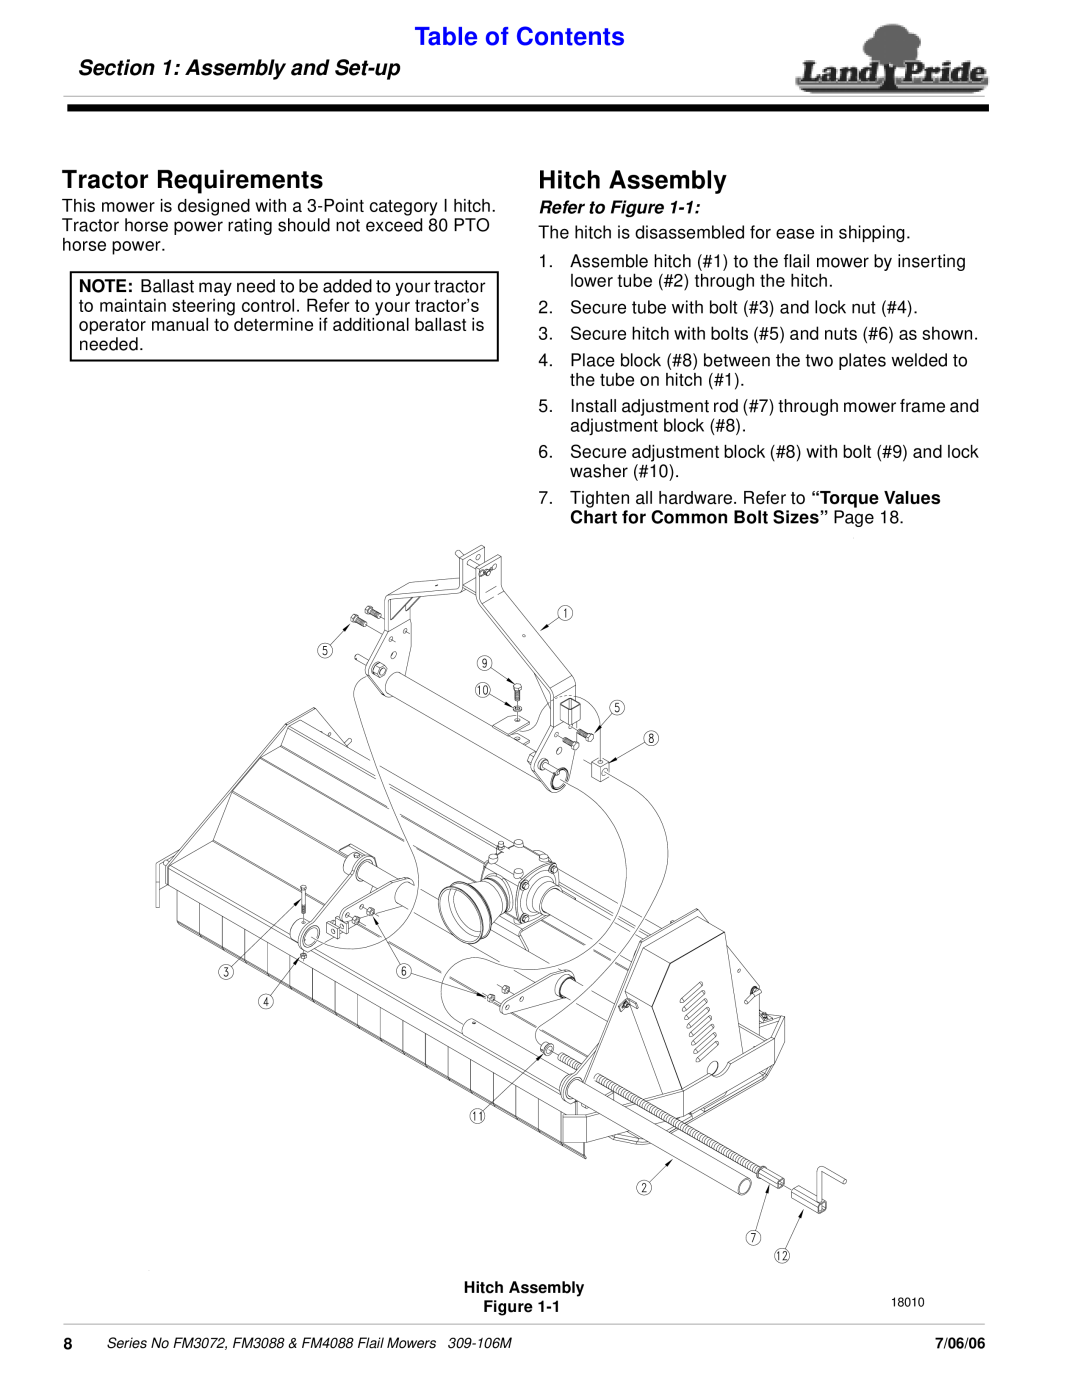 Land Pride FM4088, FM3072 Tractor Requirements, Hitch Assembly, Assembly and Set-up, Refer to Figure, Table of Contents 